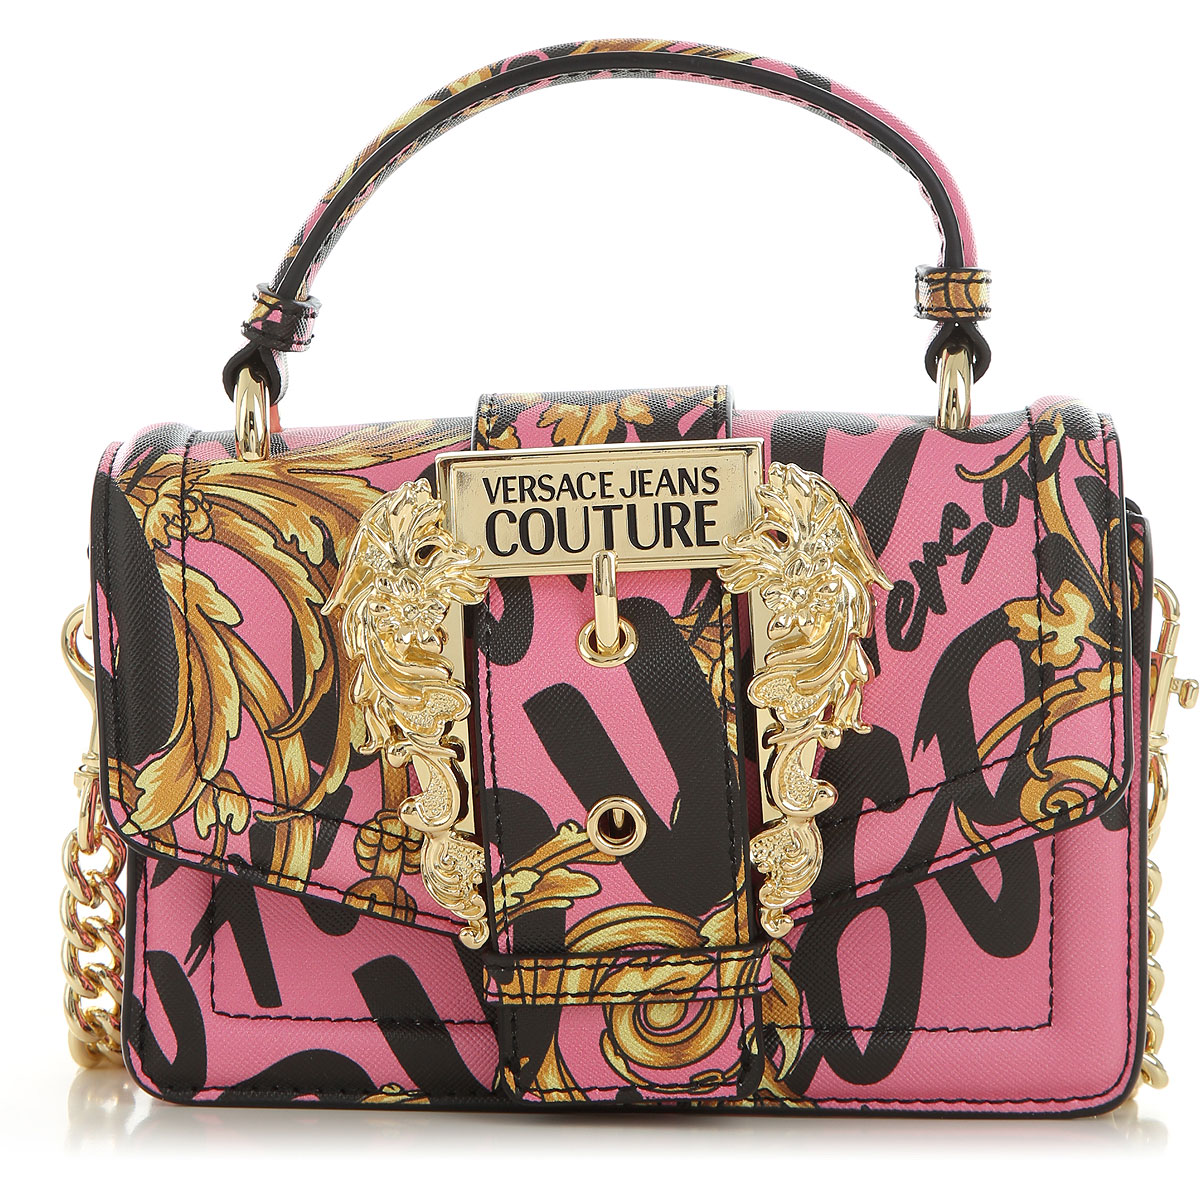 Handbags Versace Jeans Couture , Style code: